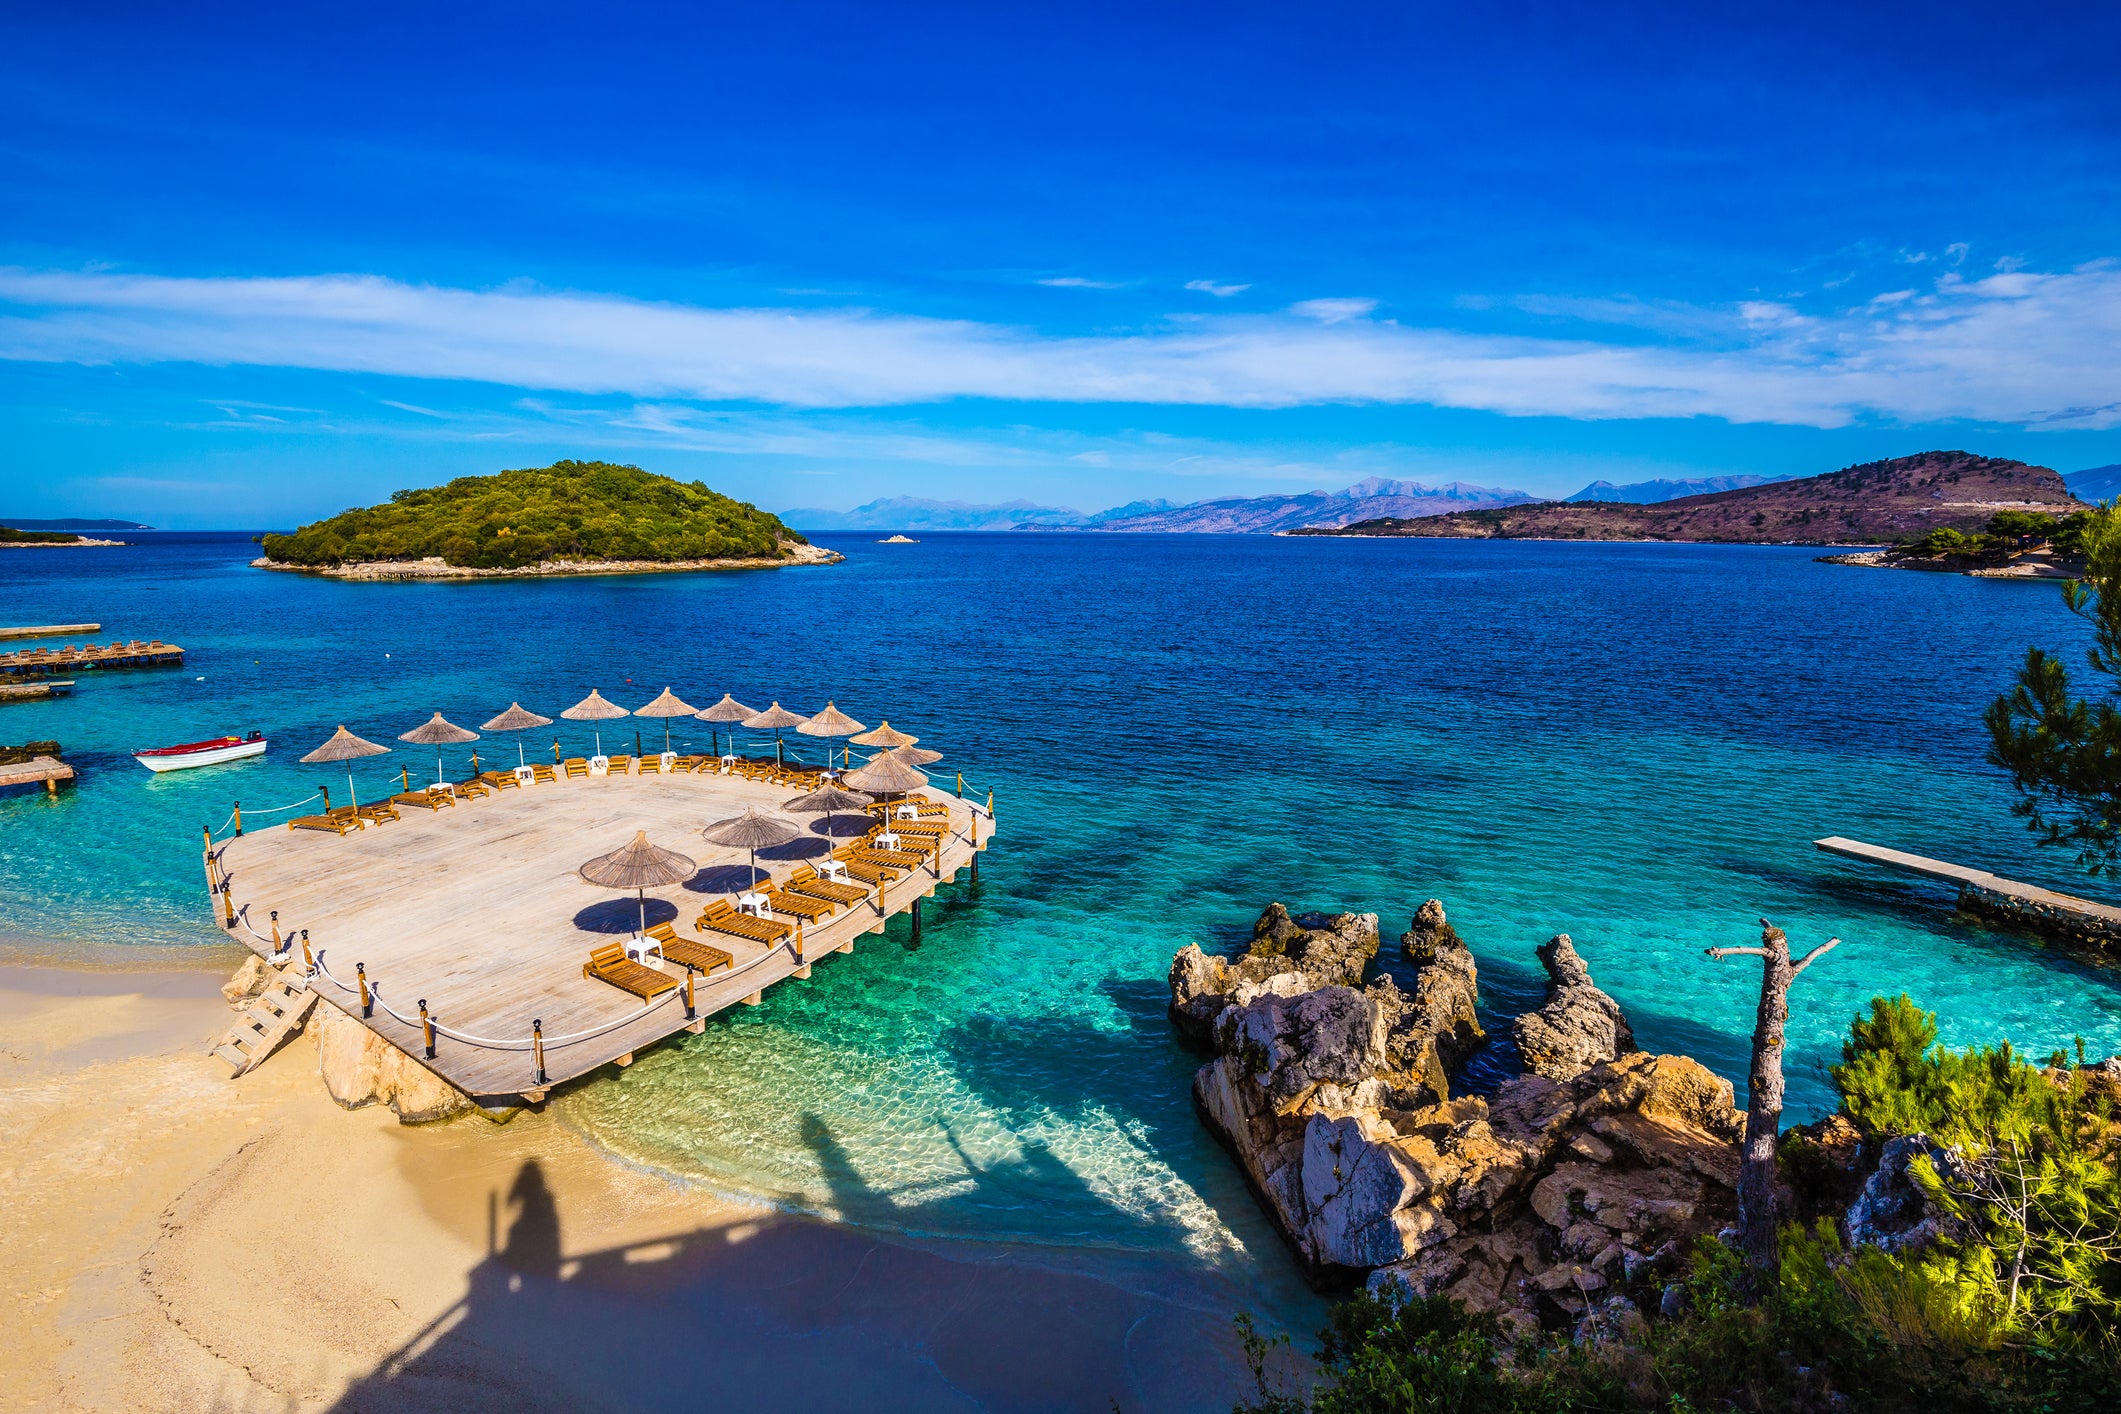 Just a boat ride from Corfu, Ksamil sits on the sparkling Ionian Sea